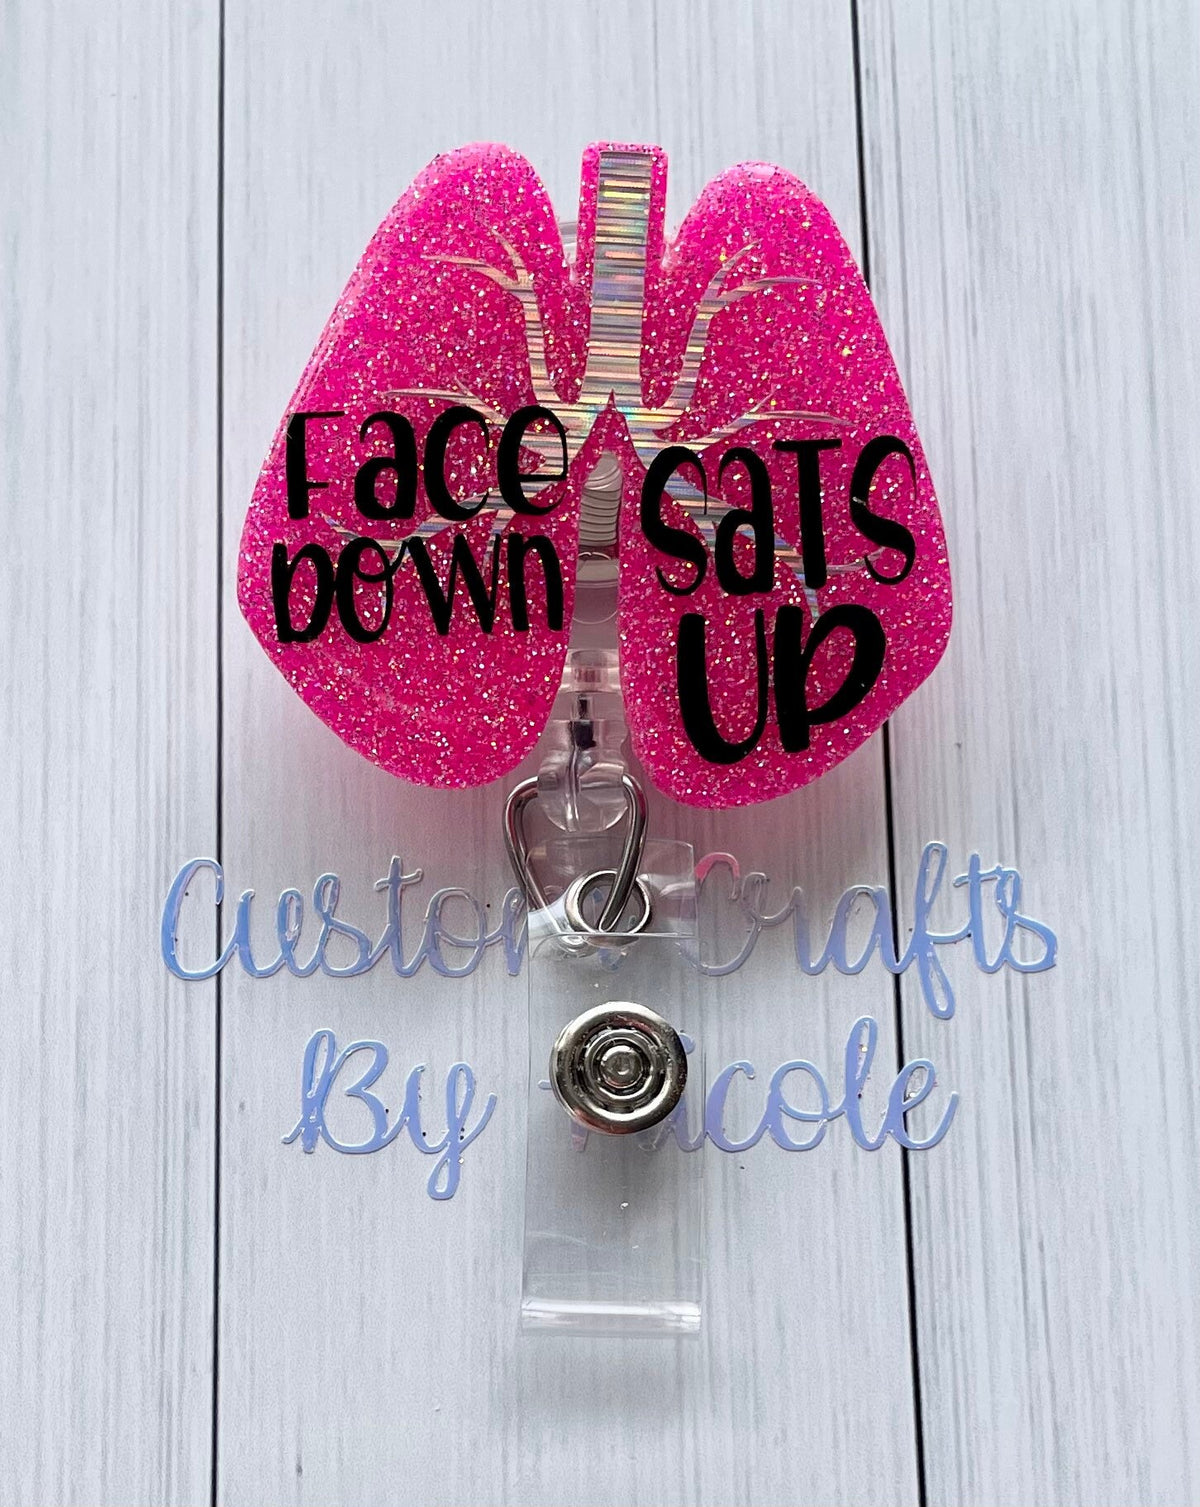 Face Down Sats Up Customized